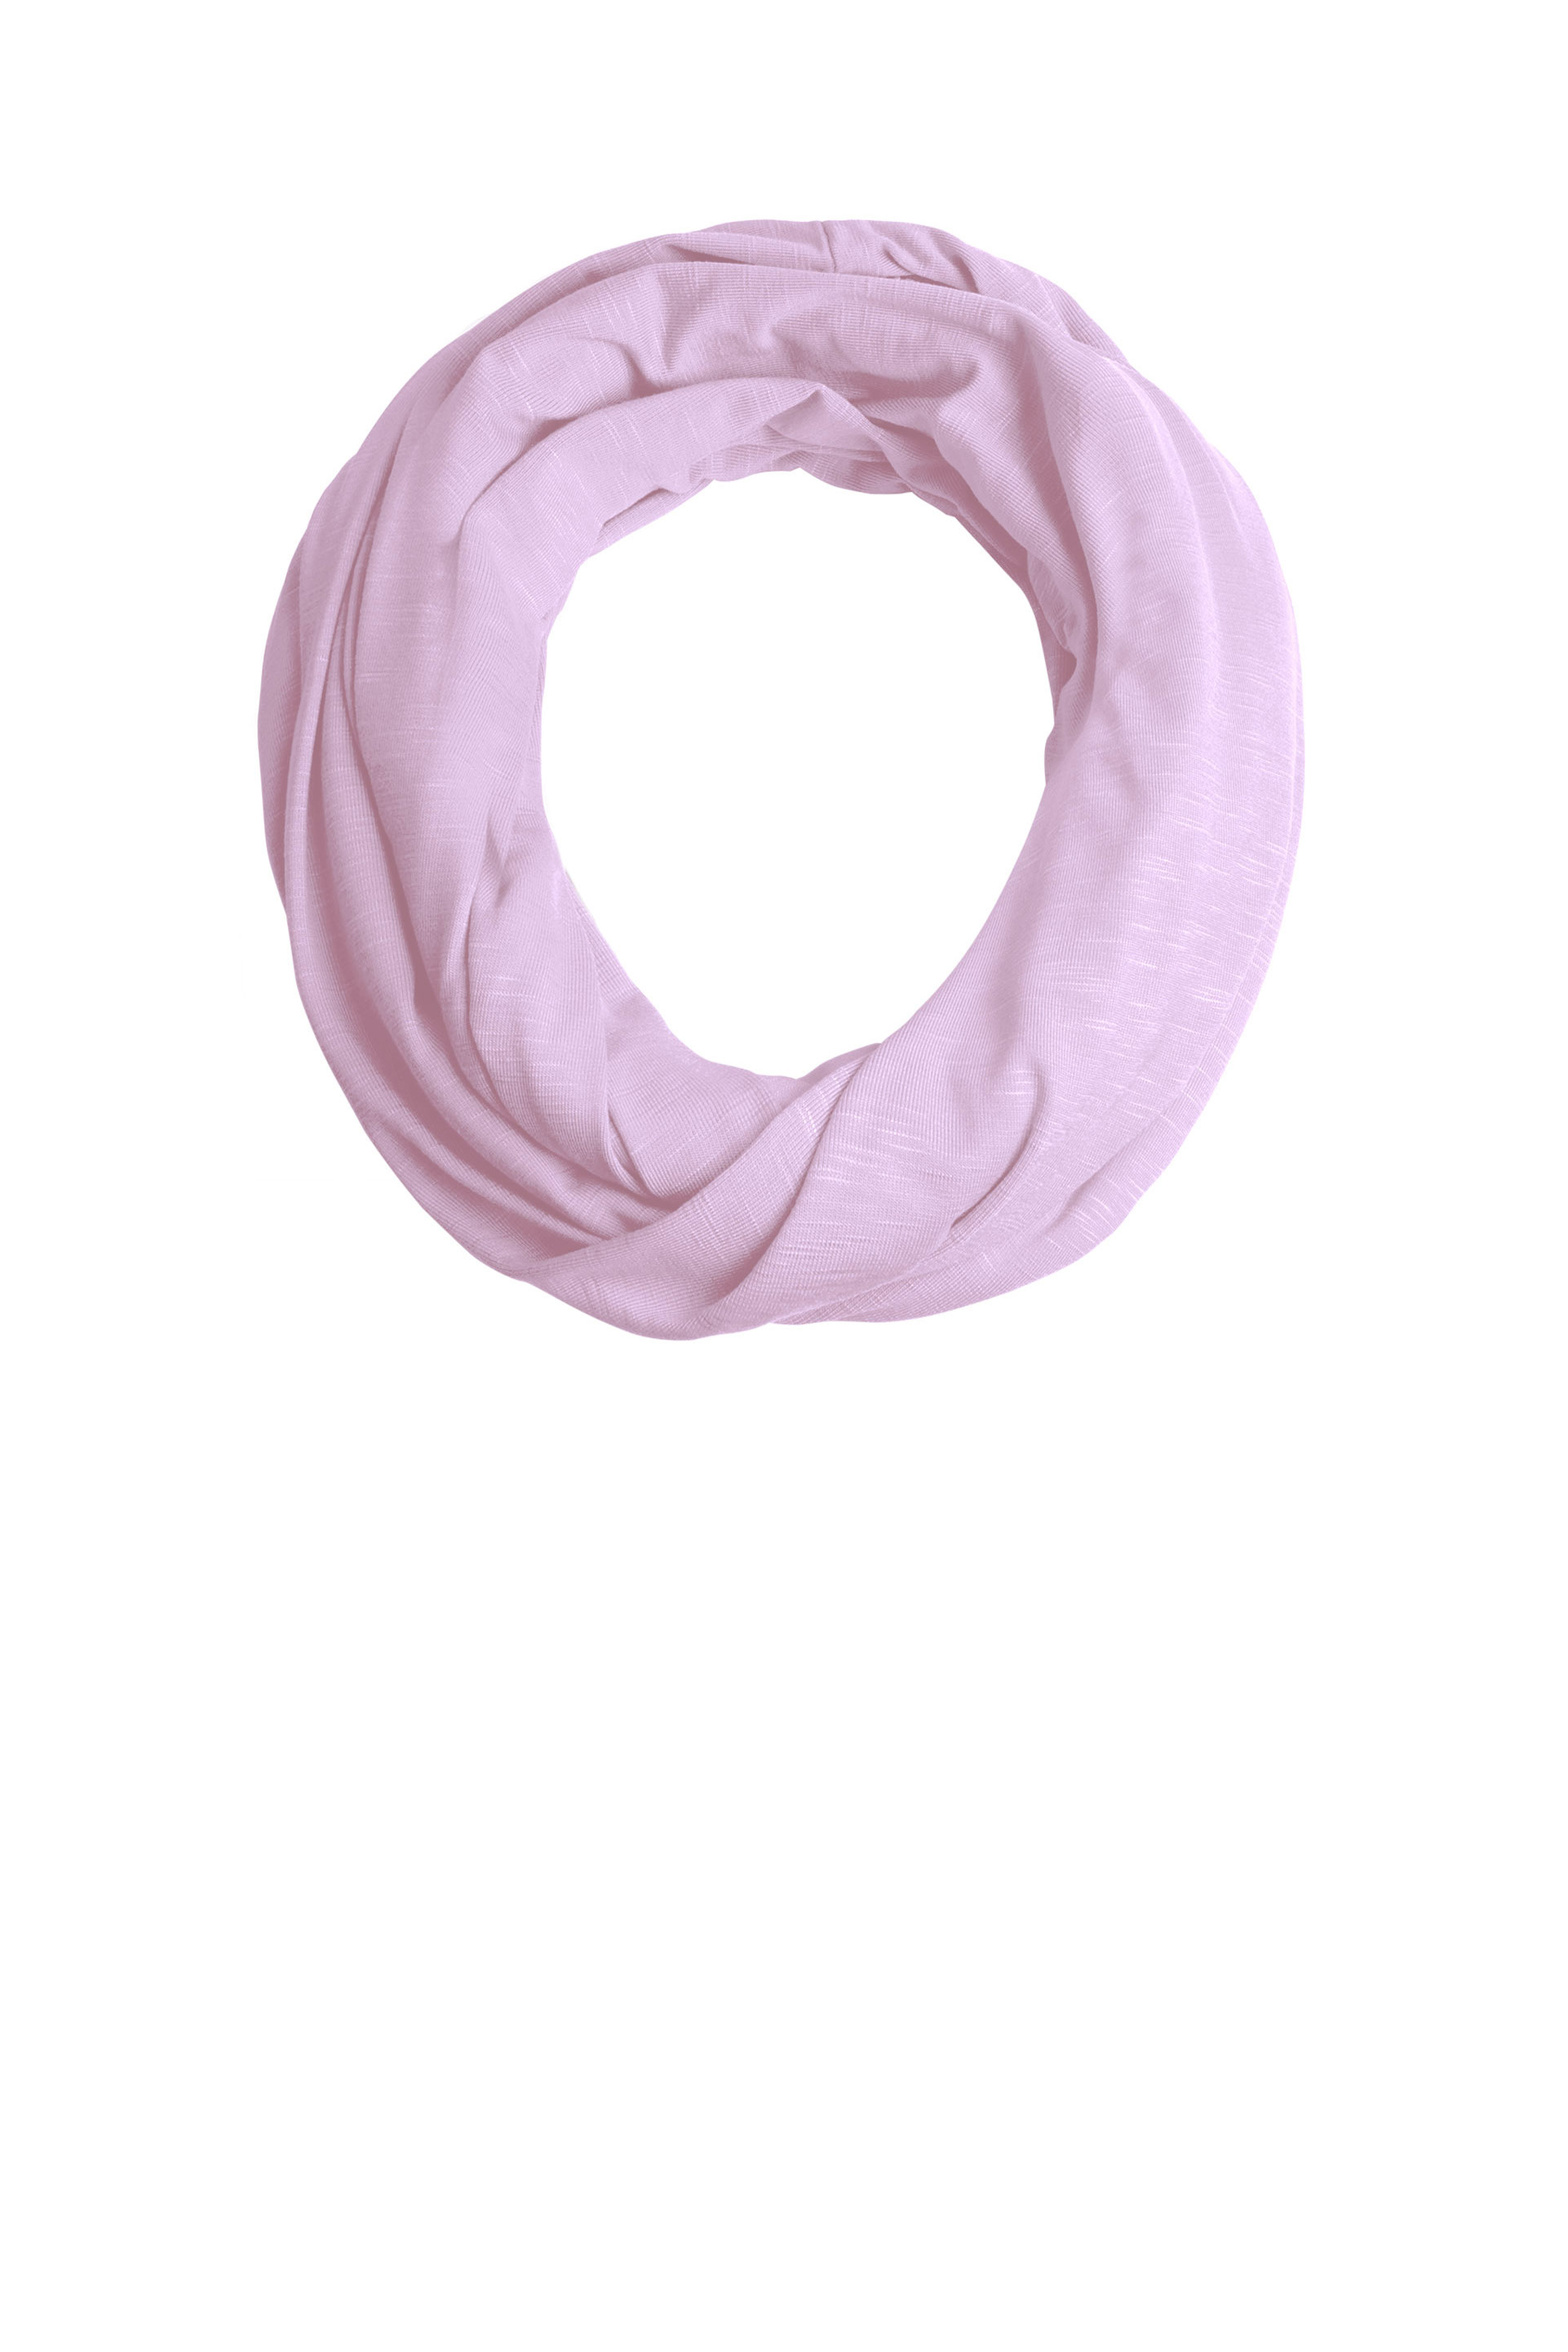 43408_florence_infinity_scarf_lilac_new.jpg